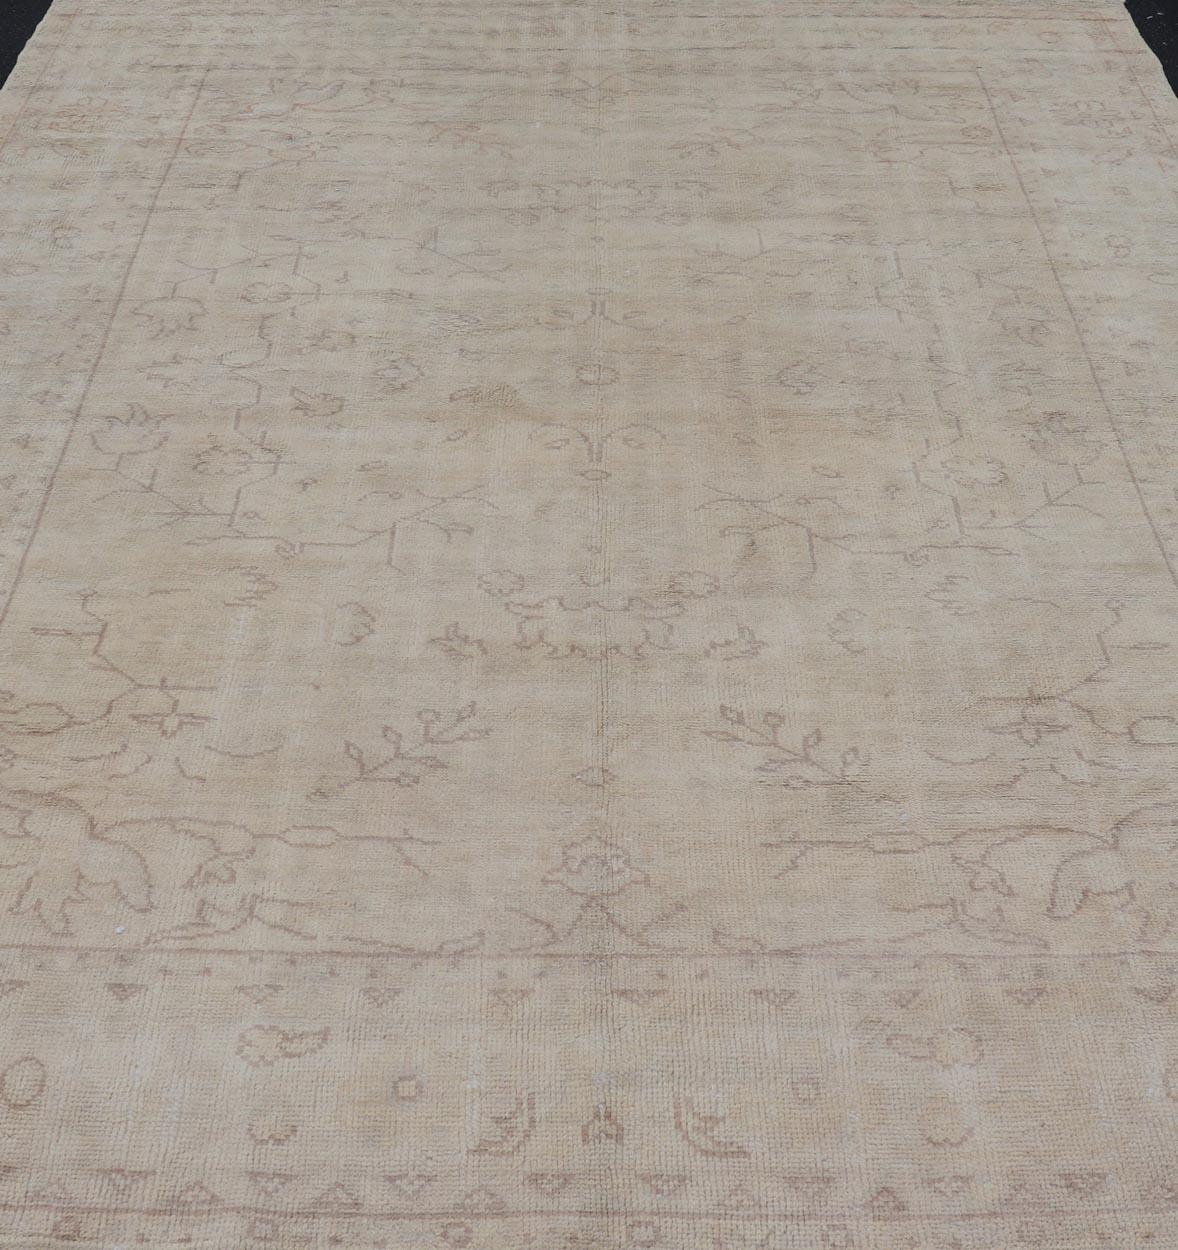 Antique Turkish Oushak Rug with all Over Design in White and Muted Design. Keivan Woven Arts / rug/ H8-0603, Country of origin/ Turkey antique. 
Measures: 9'5 x 12'10 
This antique Oushak was beautifully crafted in Turkey during the early part of